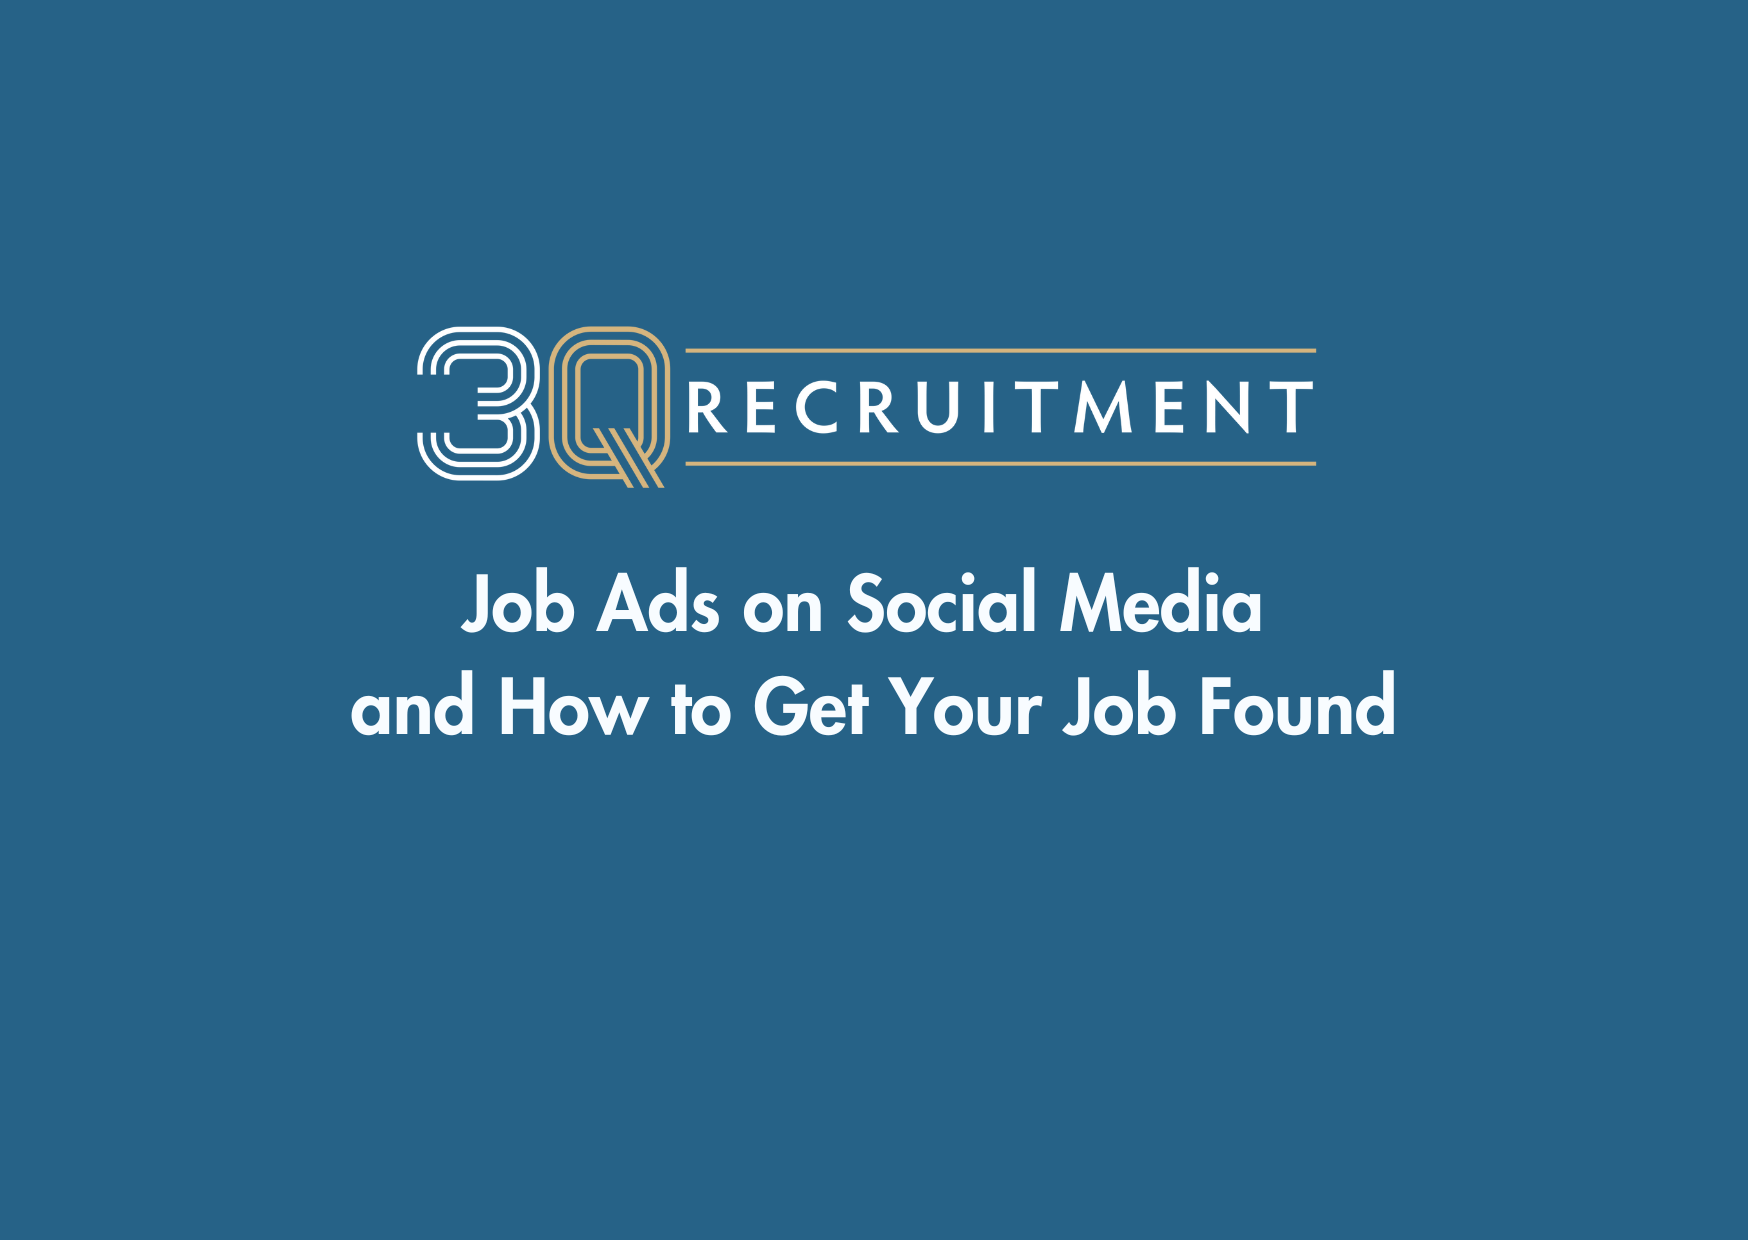 3Q Recruitment Job Ads on Social Media and How to Get Your Job Found